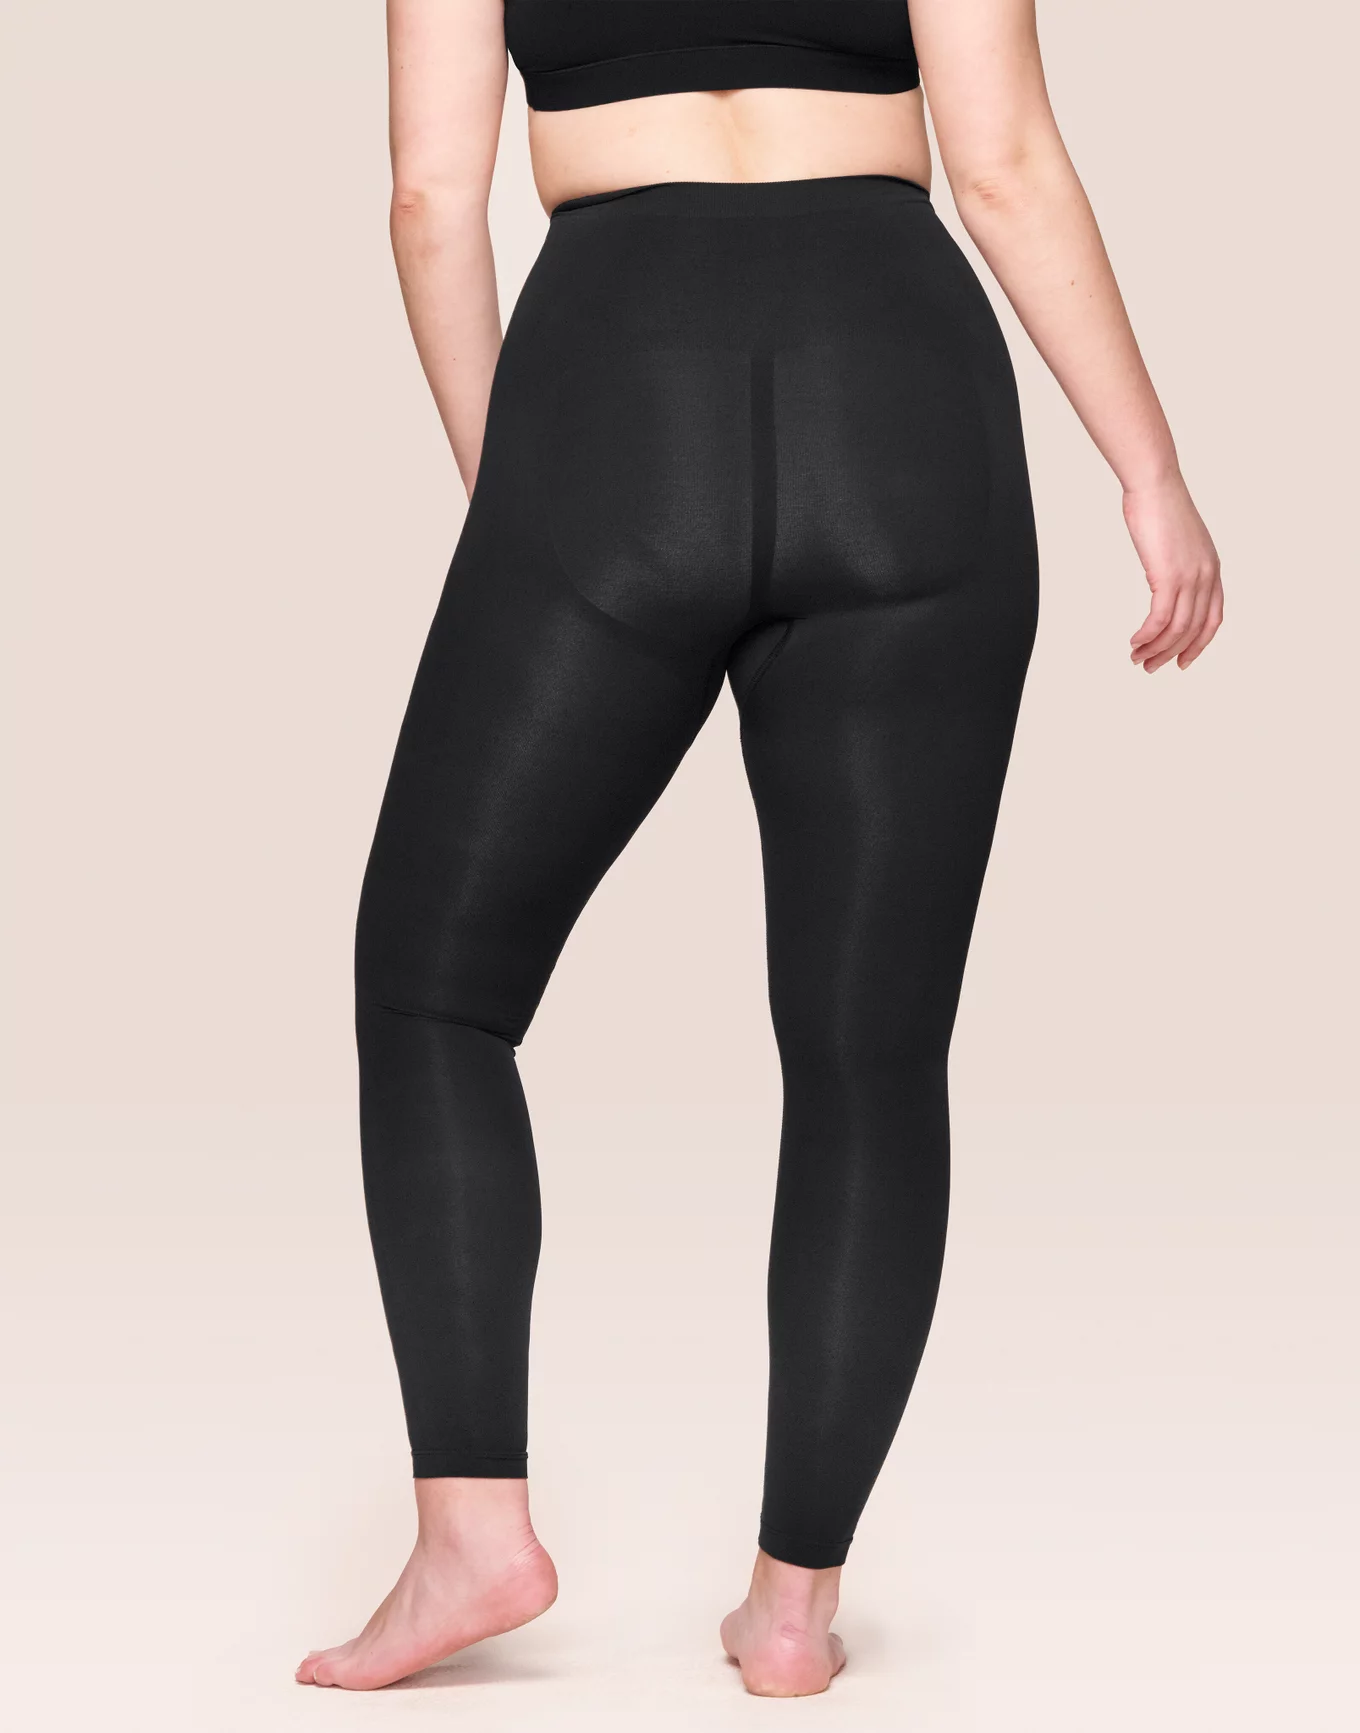 Xersion Full length leggings Size M - $7 - From Lily